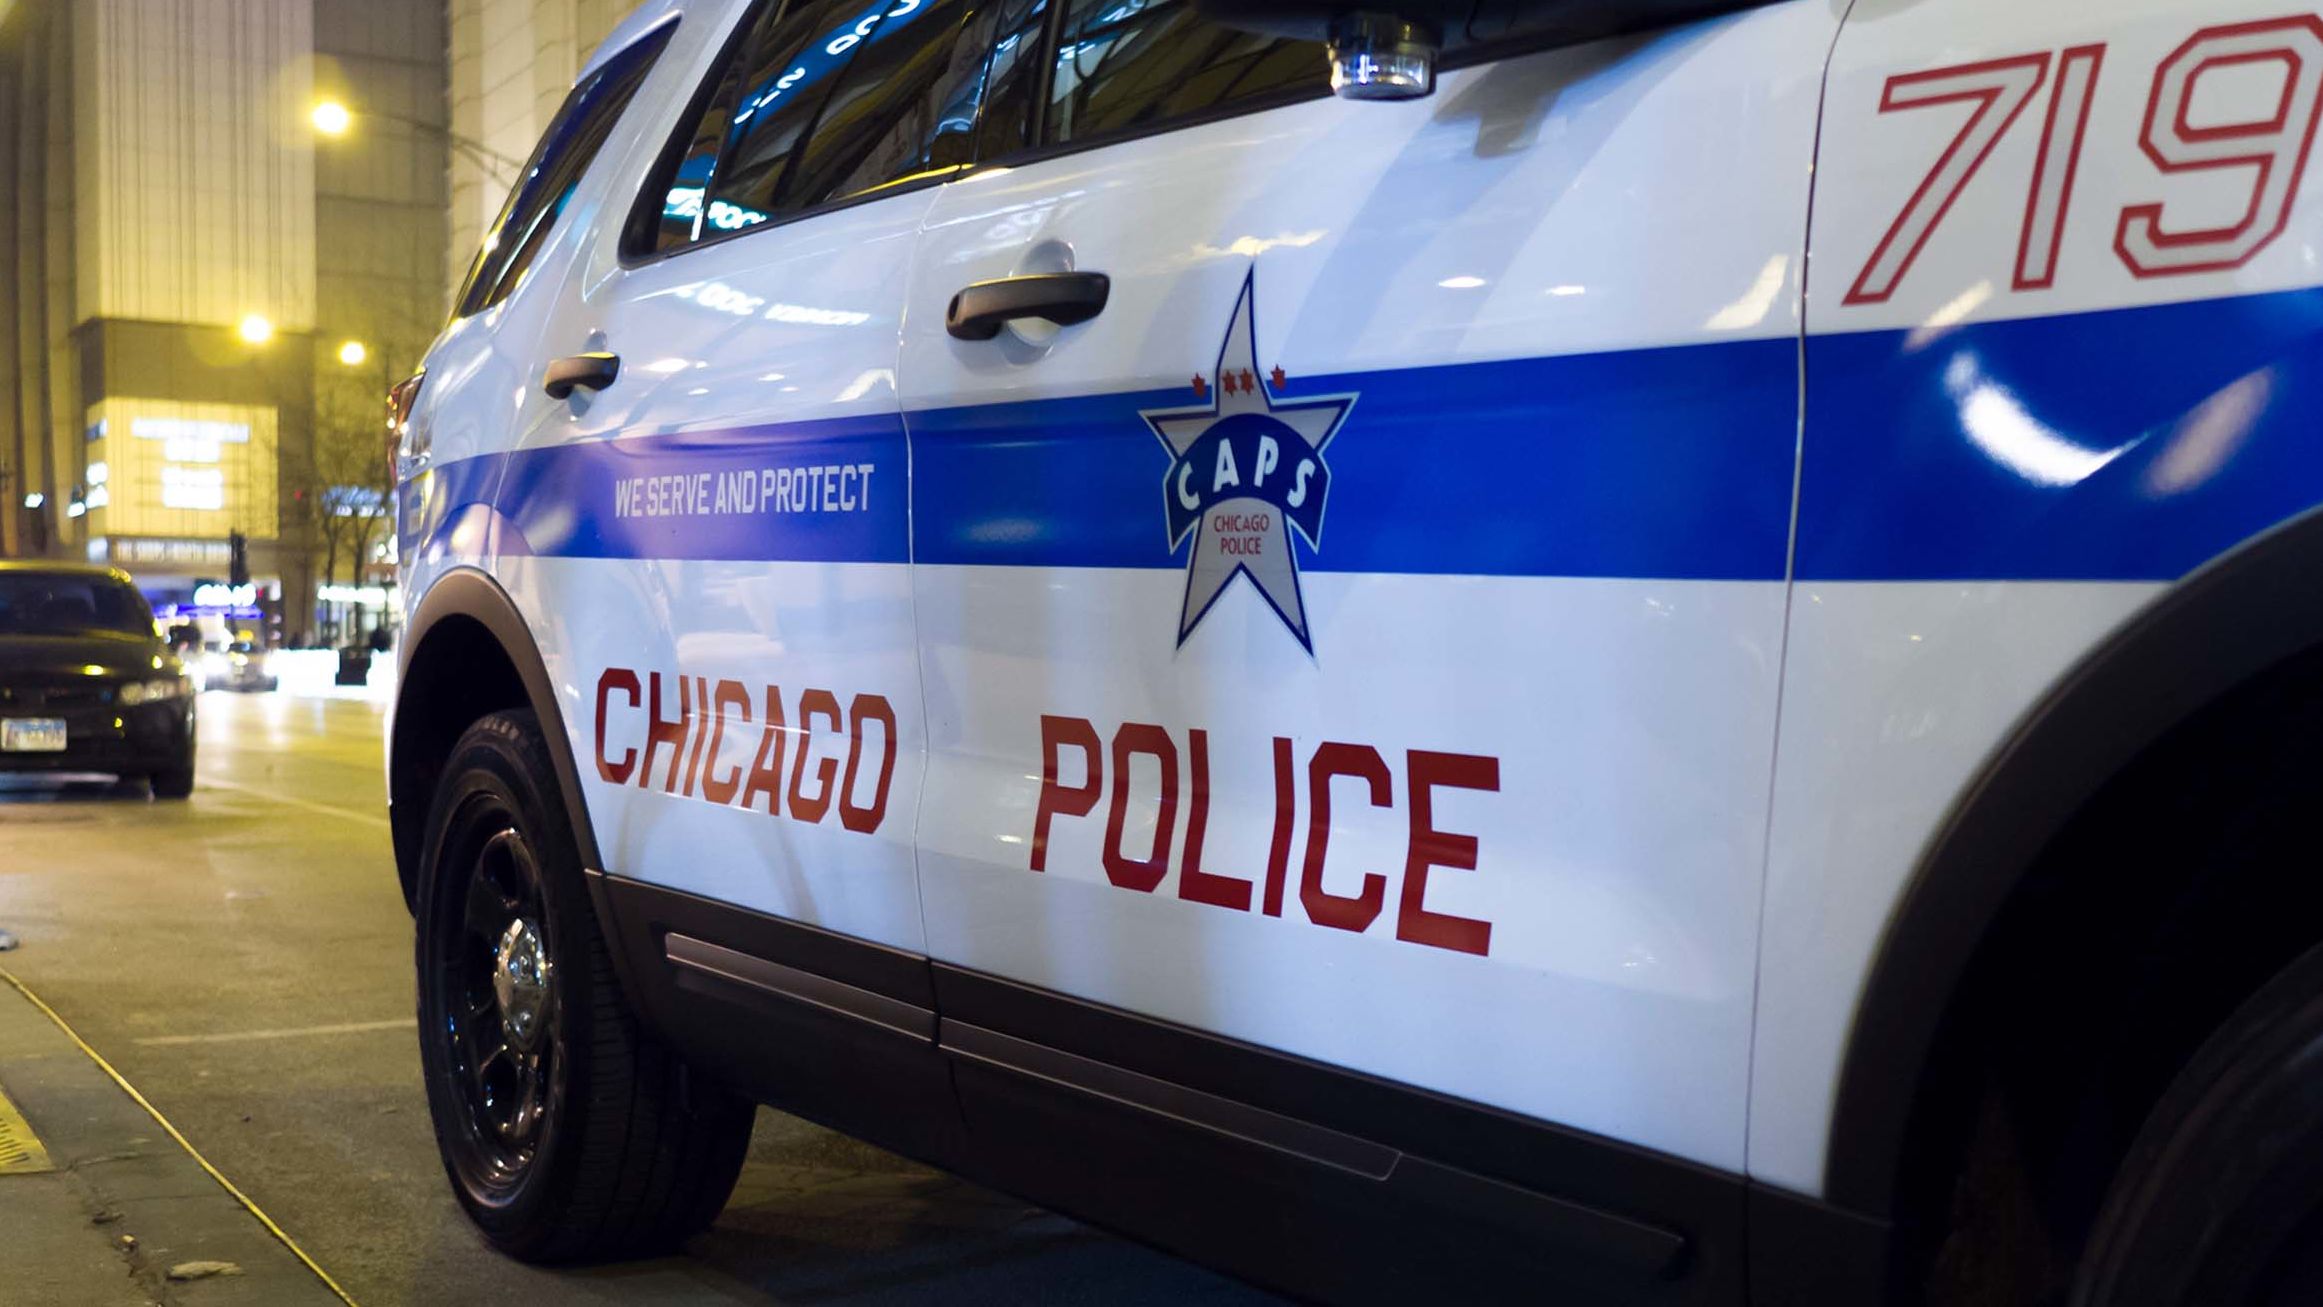 Homicides are down 10% so far this year, Chicago police said Tuesday.